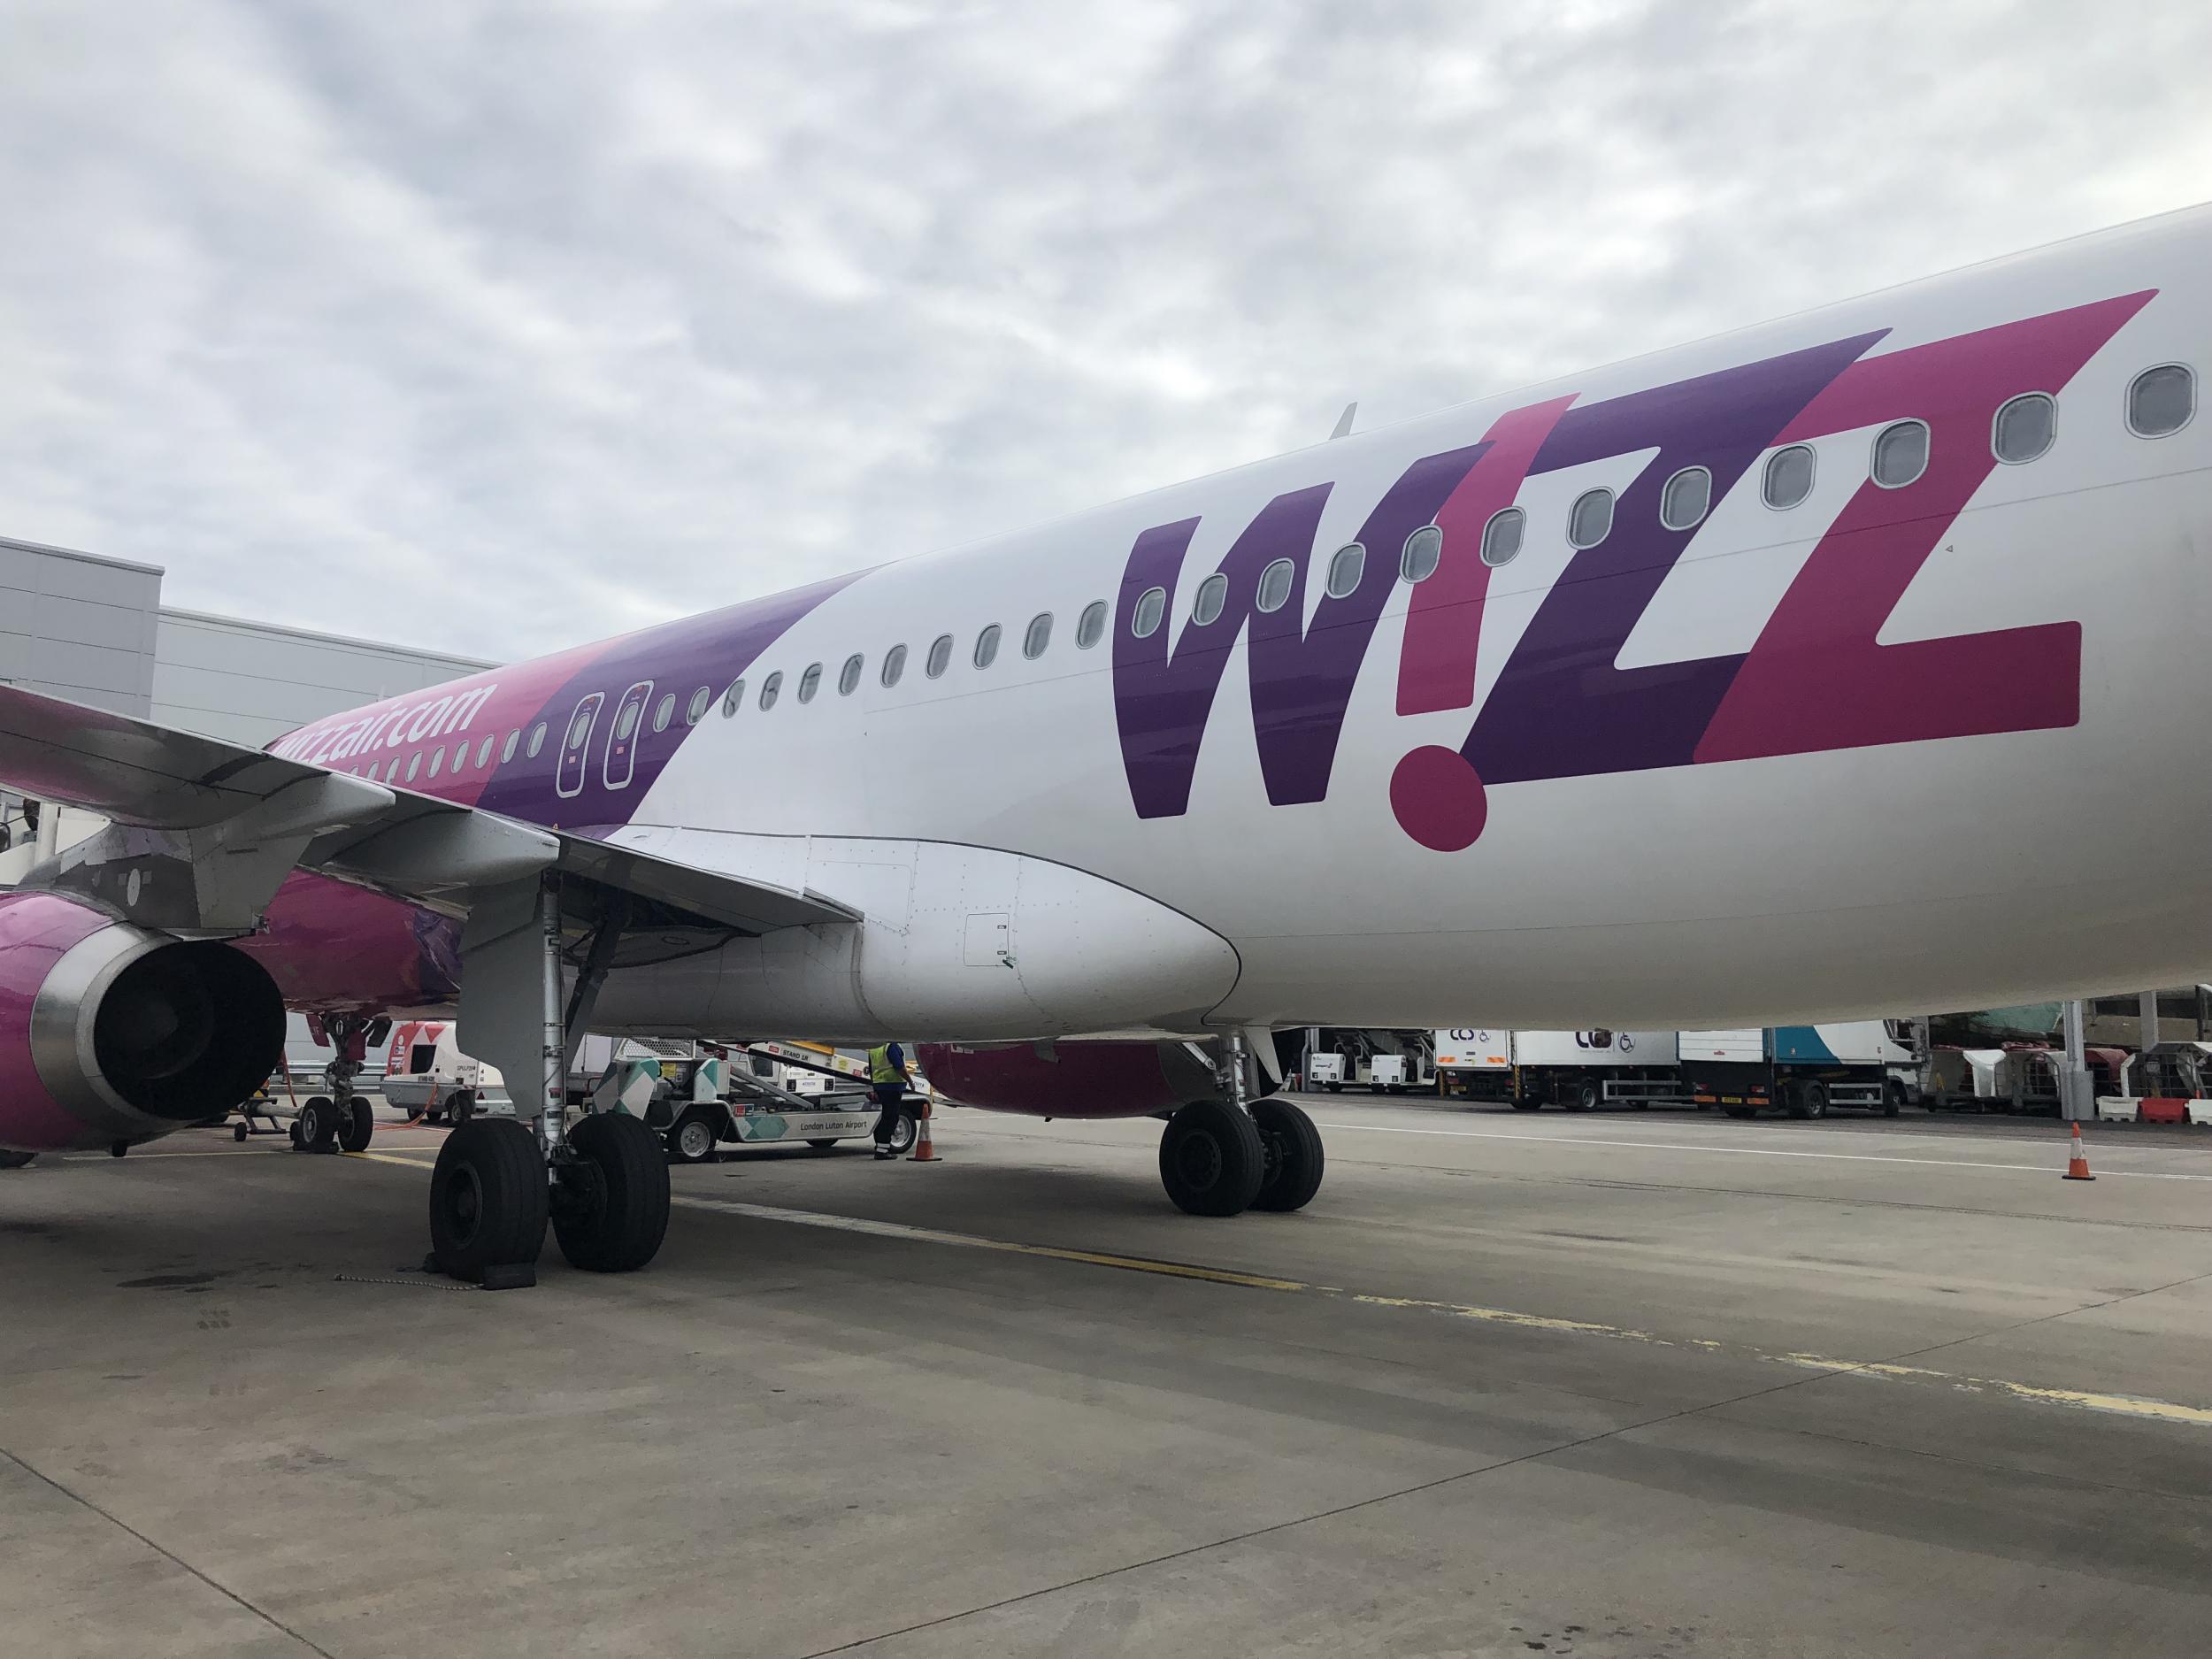 Taking off: Wizz Air will resume operations from Luton on 1 May 2020